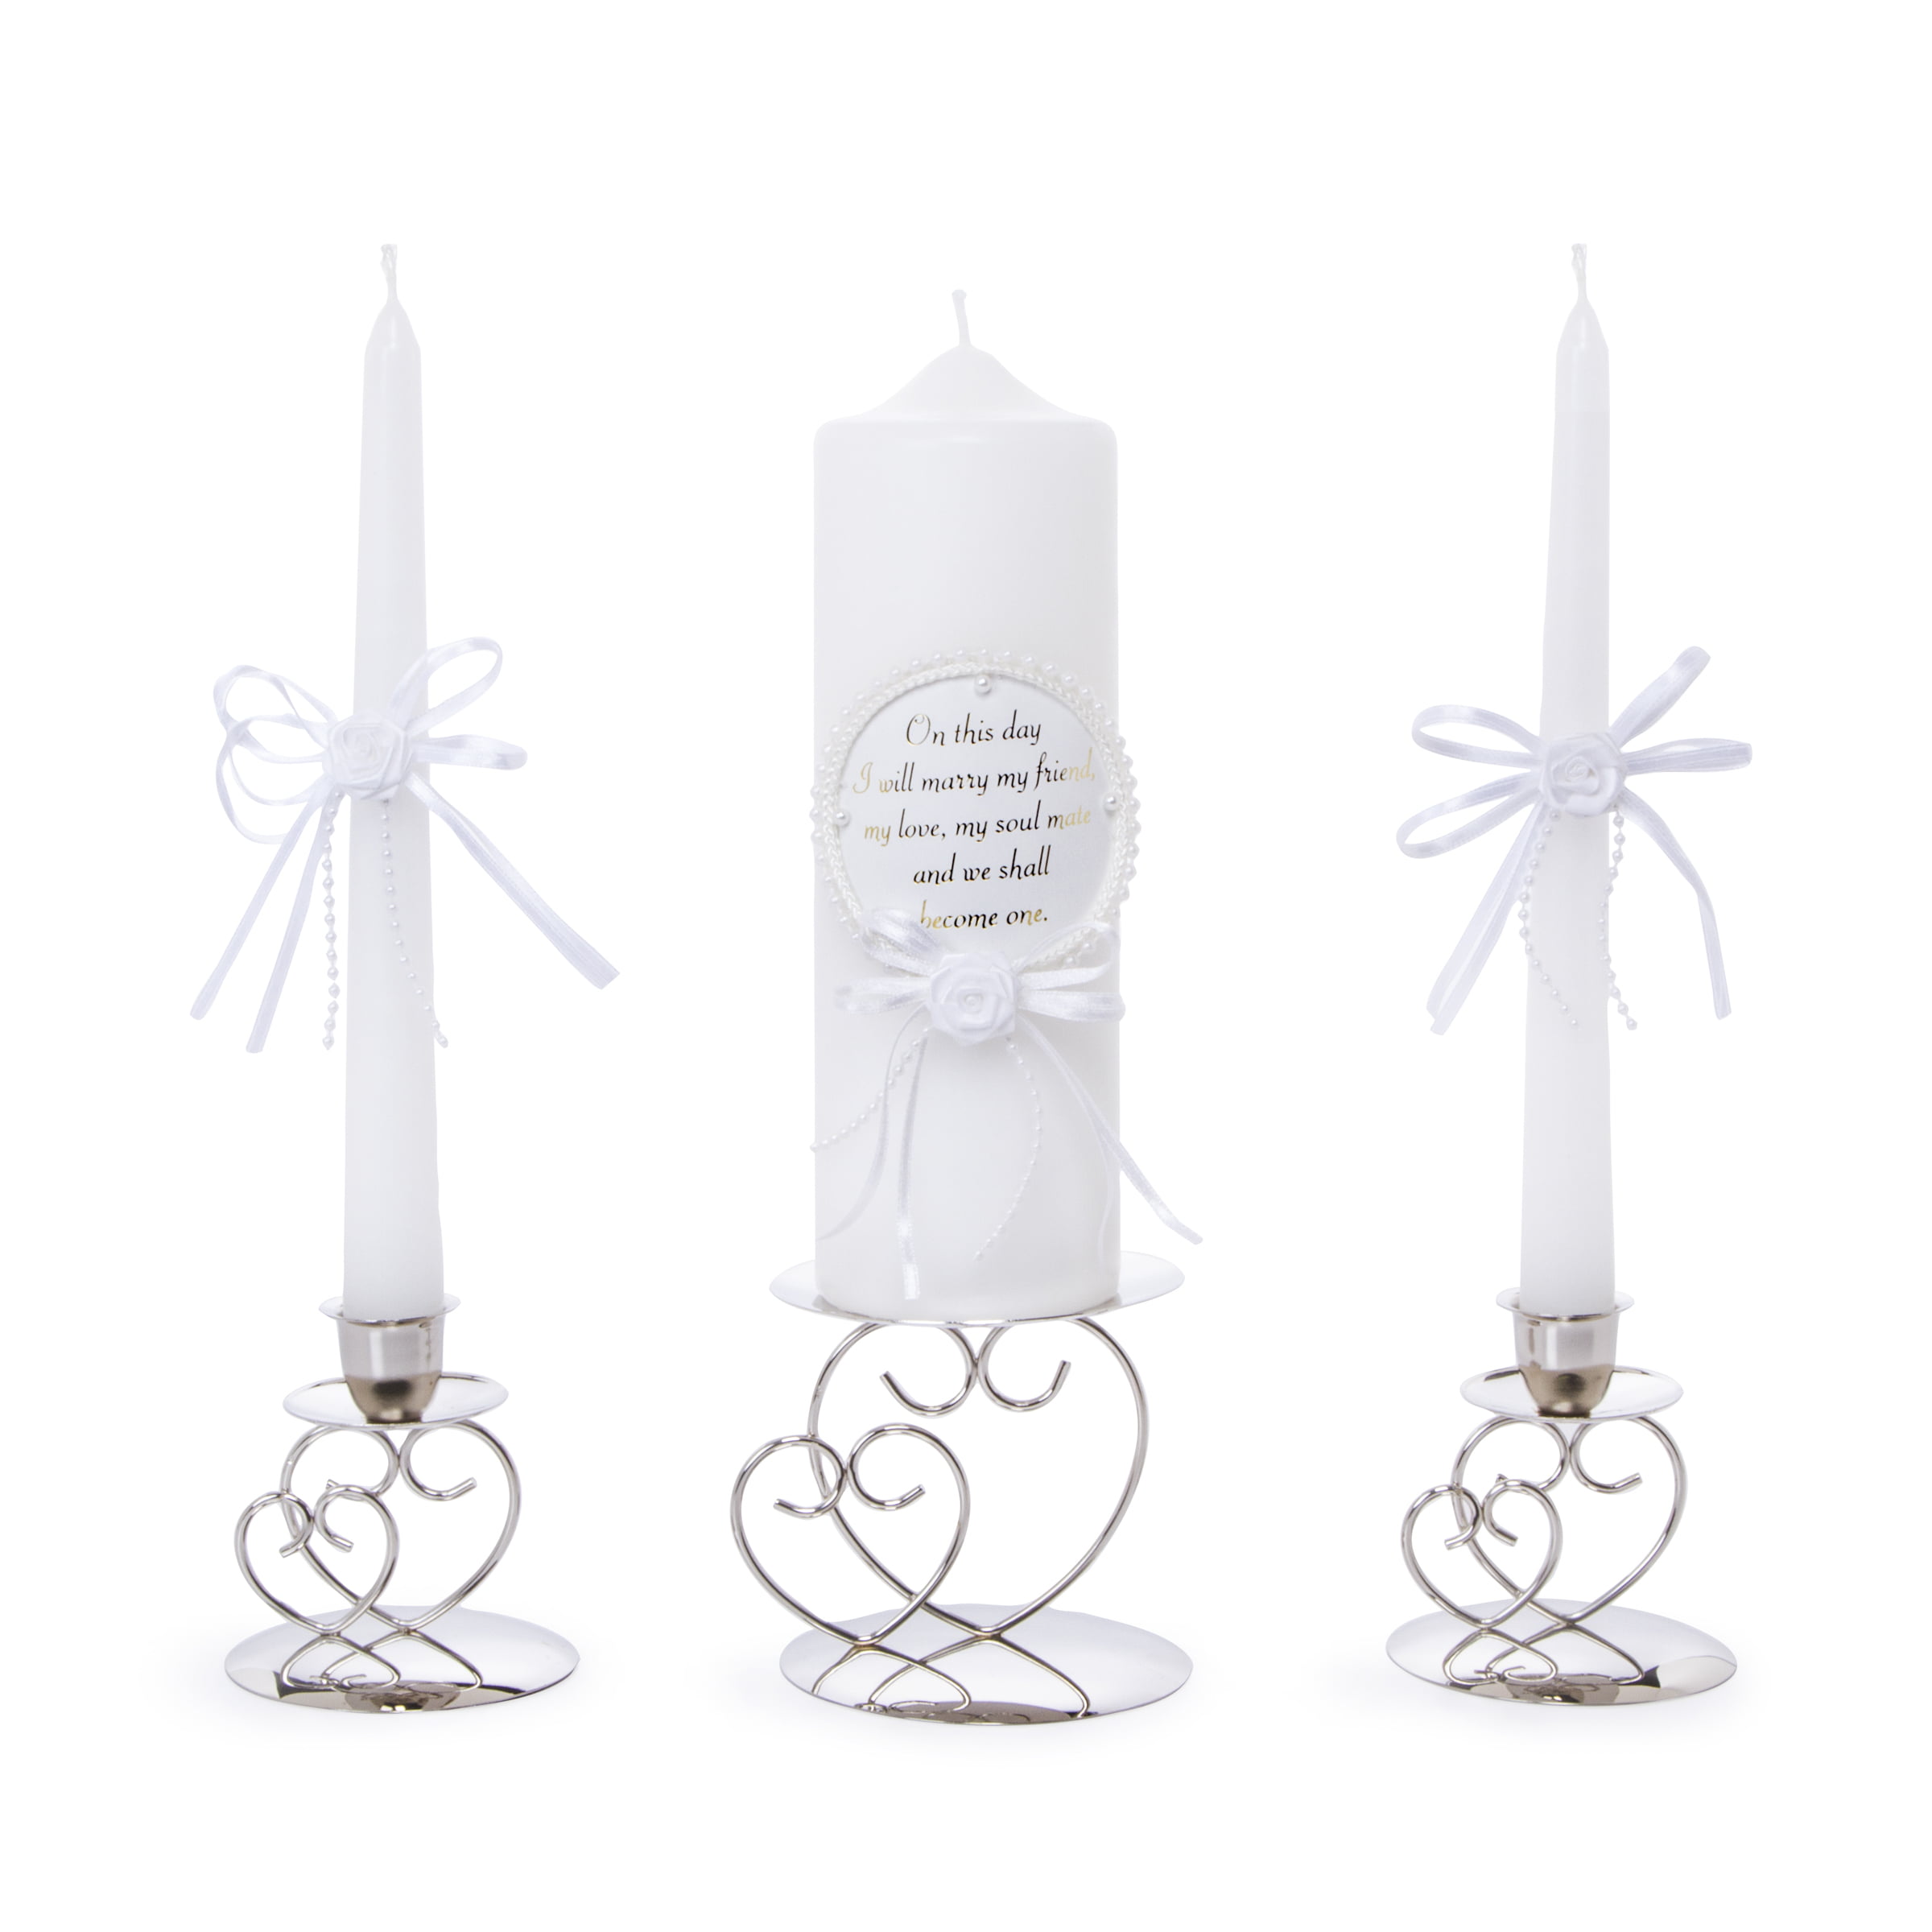 WHITE WEDDING UNITY CANDLE SET TAPPERS & PILLAR CANDLE SET BY VICTORIA LYNN 